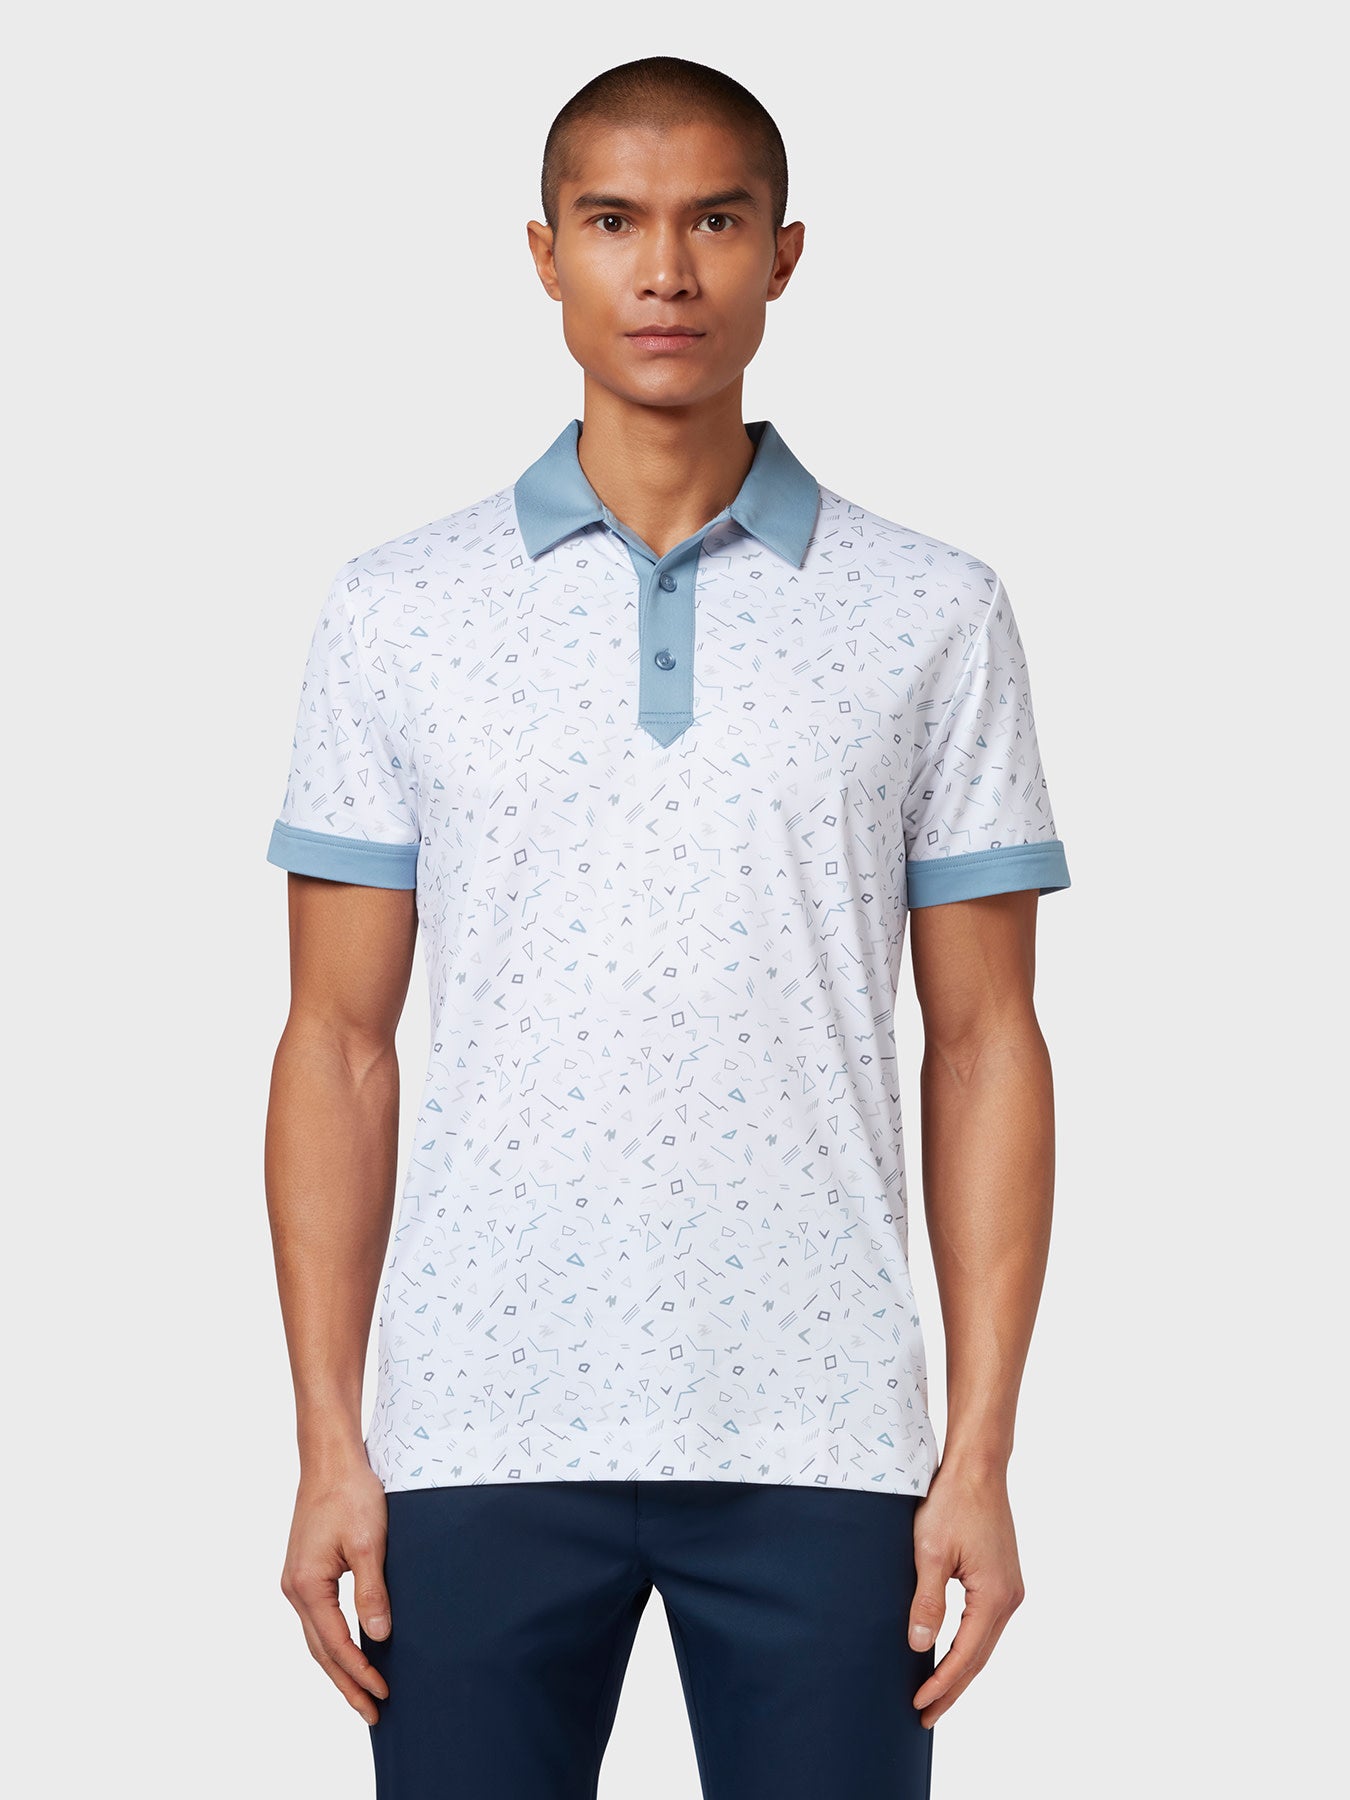 View X Series Chev Memphis All Over Print Polo In Bright White information